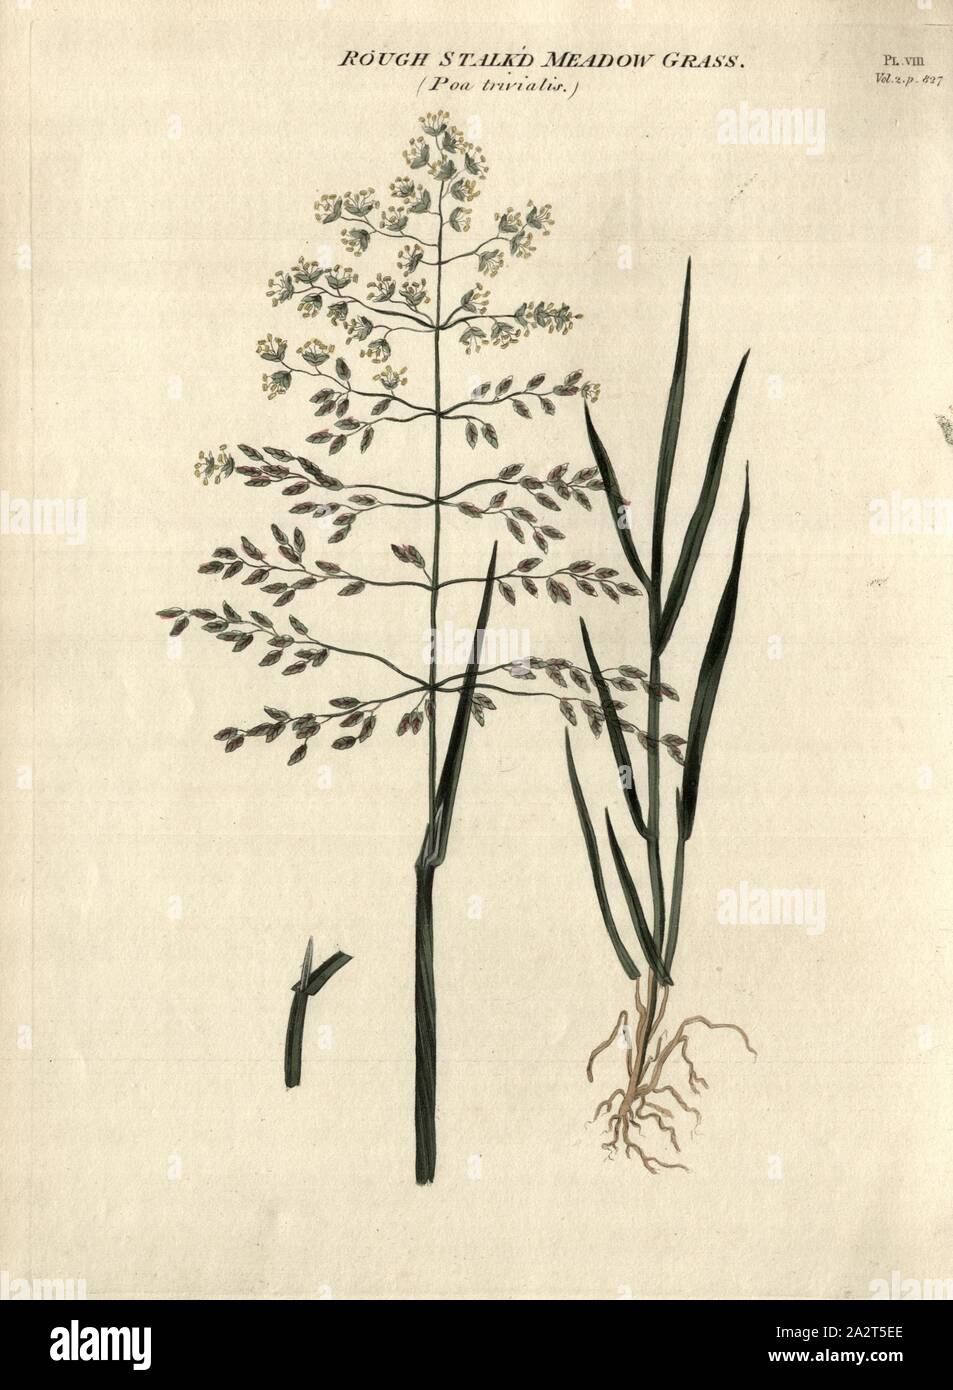 Rough Stalked Meadow Grass Poa trivialis, Common bluegrass, Fig. 9, Pl. VIII, after p. 826, R.W. Dickson: Practical agriculture, or, a complete system of modern husbandry: with the methods of planting, and the management of live stock. Bd. 2. London: printed for Richard Phillips; by R. Taylor and Co., 1805 Stock Photo